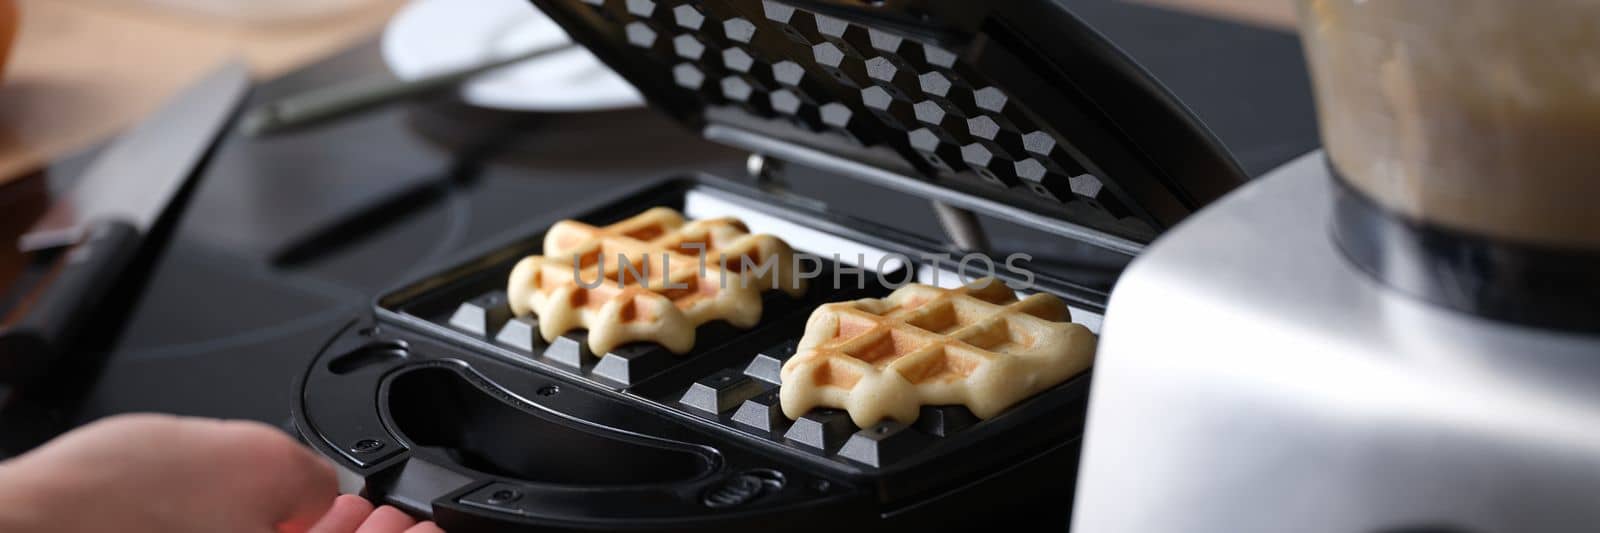 Woman prepares homemade Belgian waffles in kitchen by kuprevich